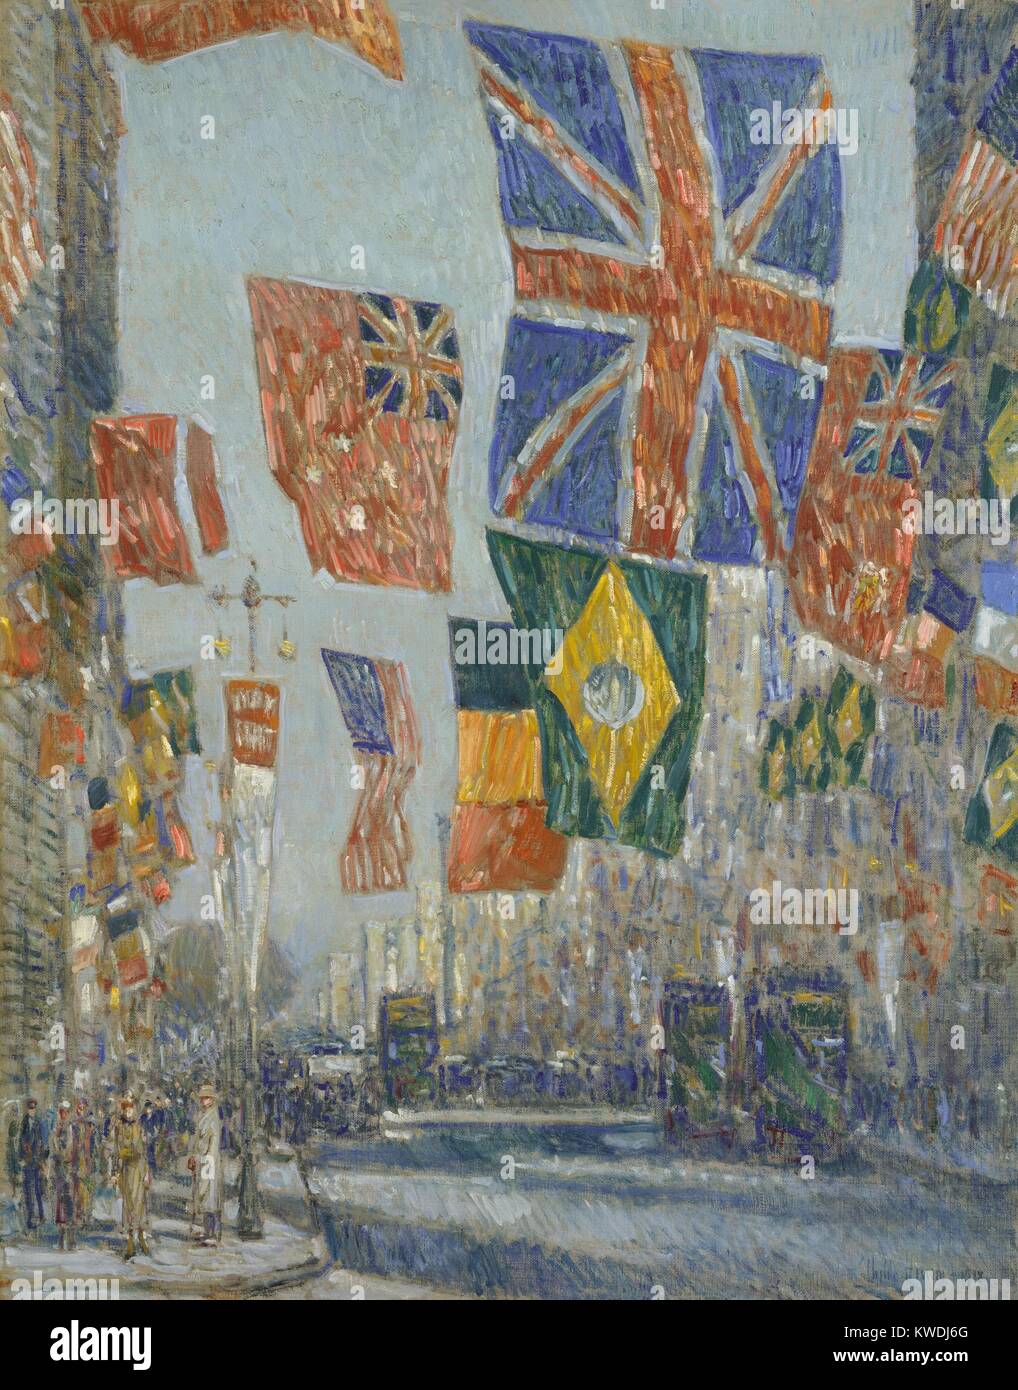 AVENUE OF THE ALLIES, GREAT BRITAIN, by Childe Hassam, 1918, American painting, oil on canvas. Manhattan’s Fifth Avenue decorated with patriotic emblems in 1918 during World War 1. This view north from 53rd Street shows flags of the Allies Great Britain, Brazil, Belgium and USA. It is one of 30 works Hassam painted of such flag displays during the WW1 (BSLOC 2017 9 23) Stock Photo